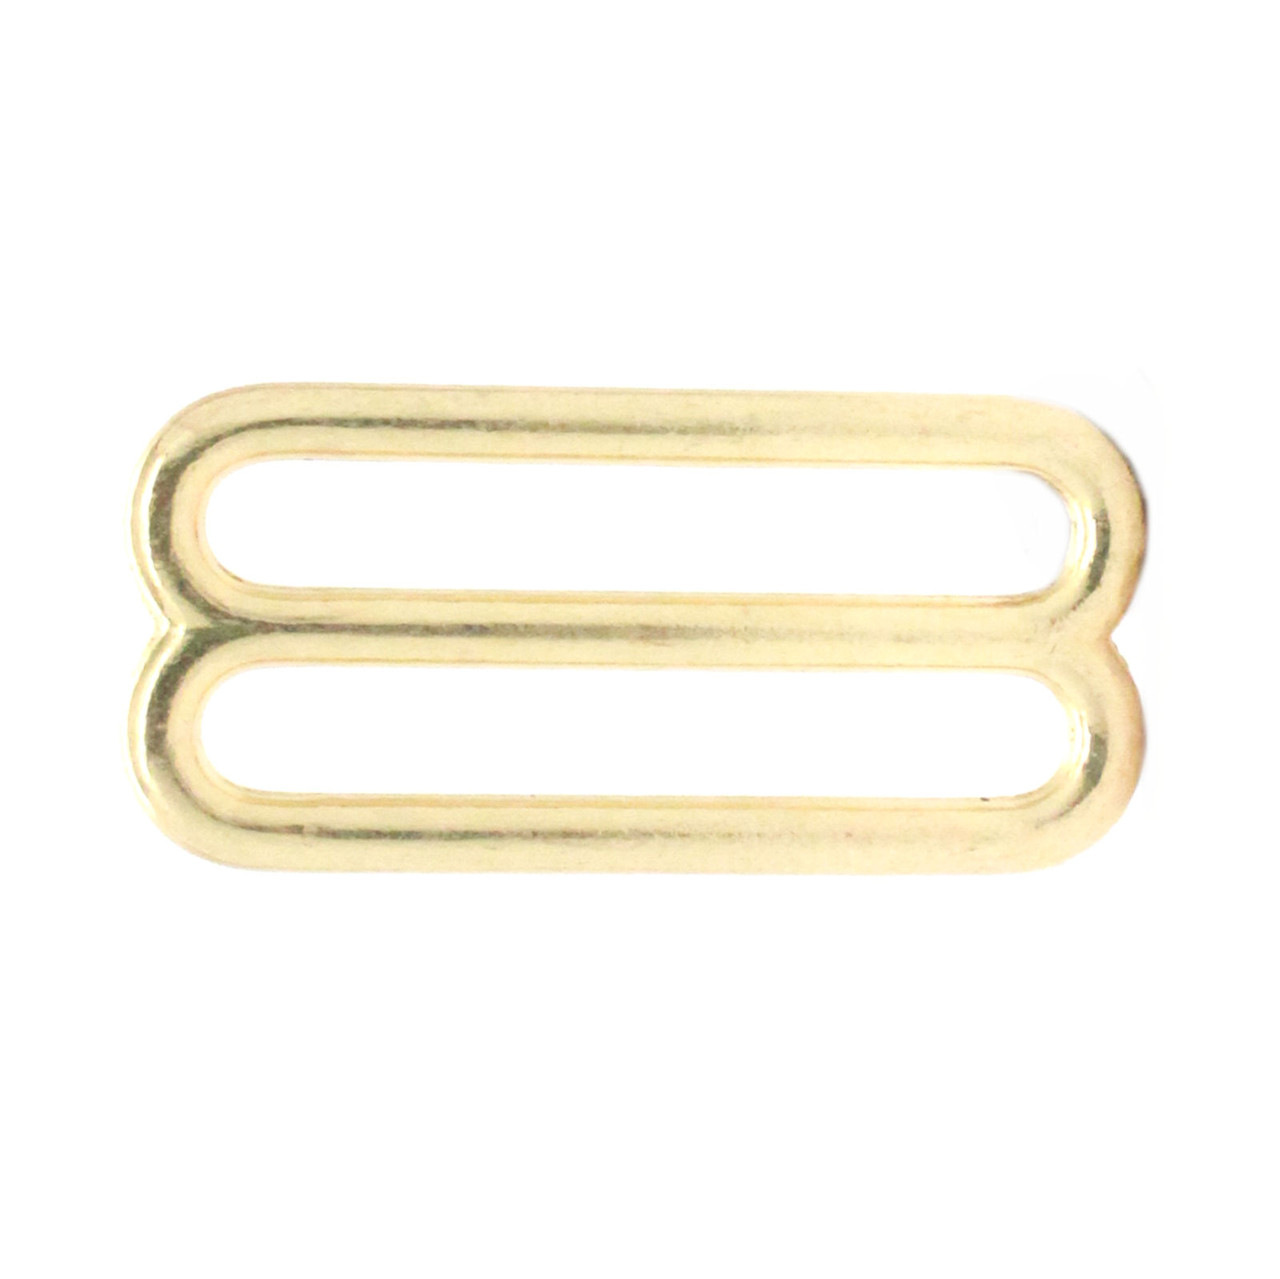 Double Loop Strap Adjuster 1.5 Inch Brass Side